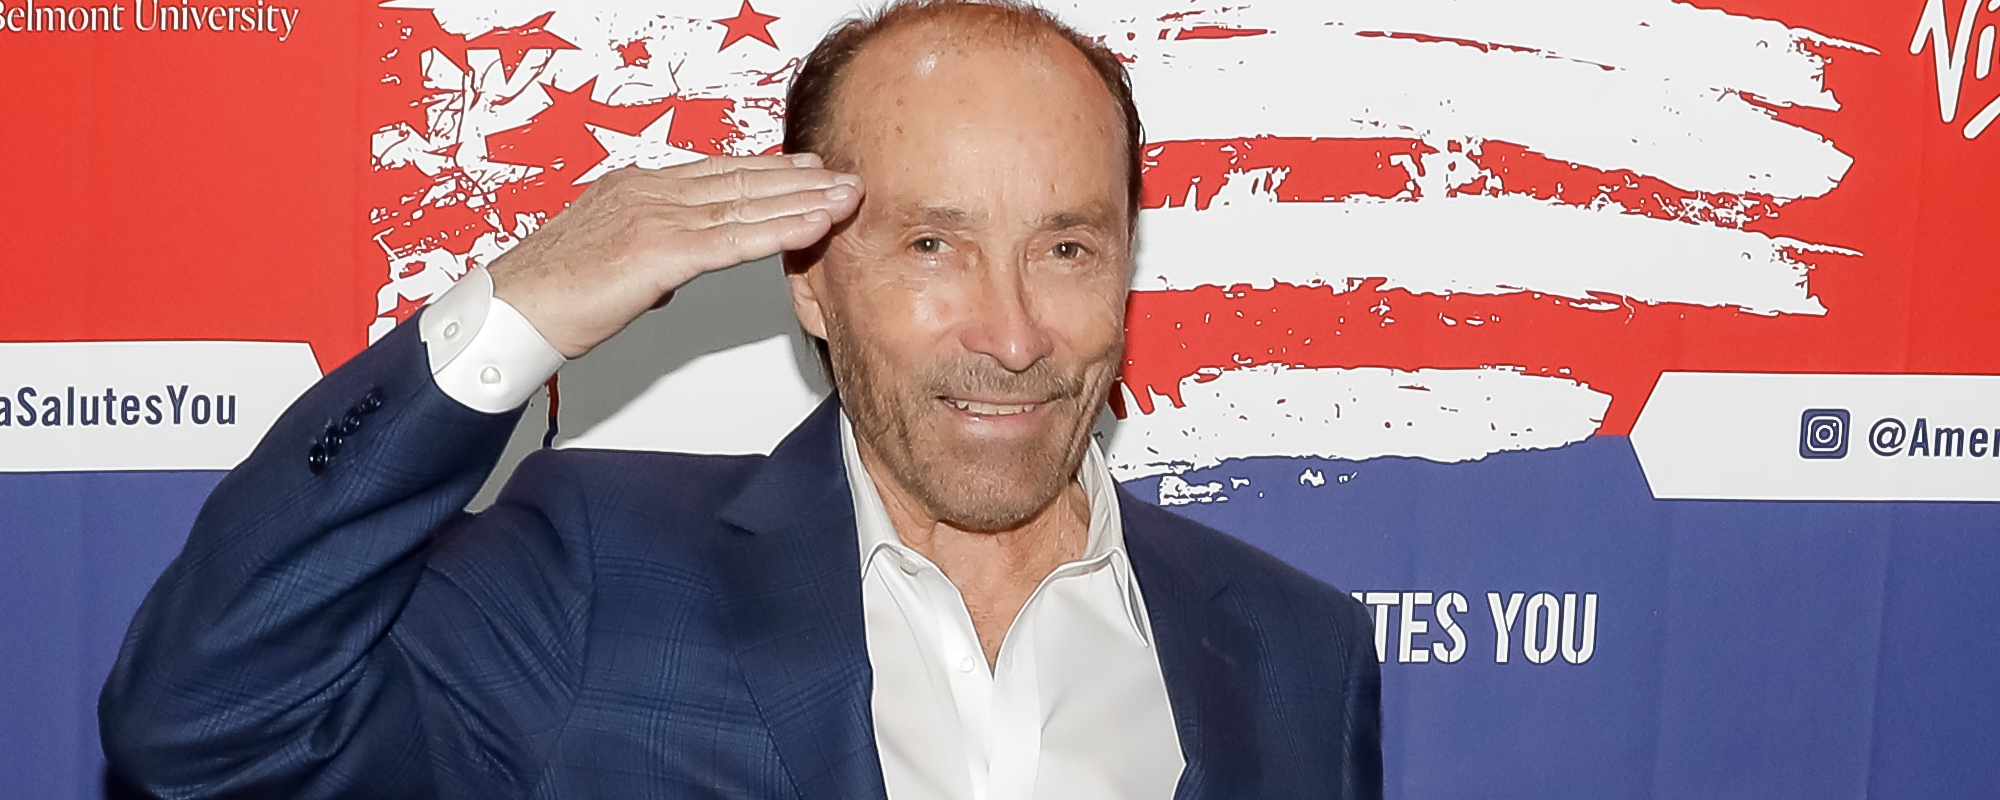 Lee Greenwood Celebrates 40th Anniversary of "God Bless the USA" With Special Performance